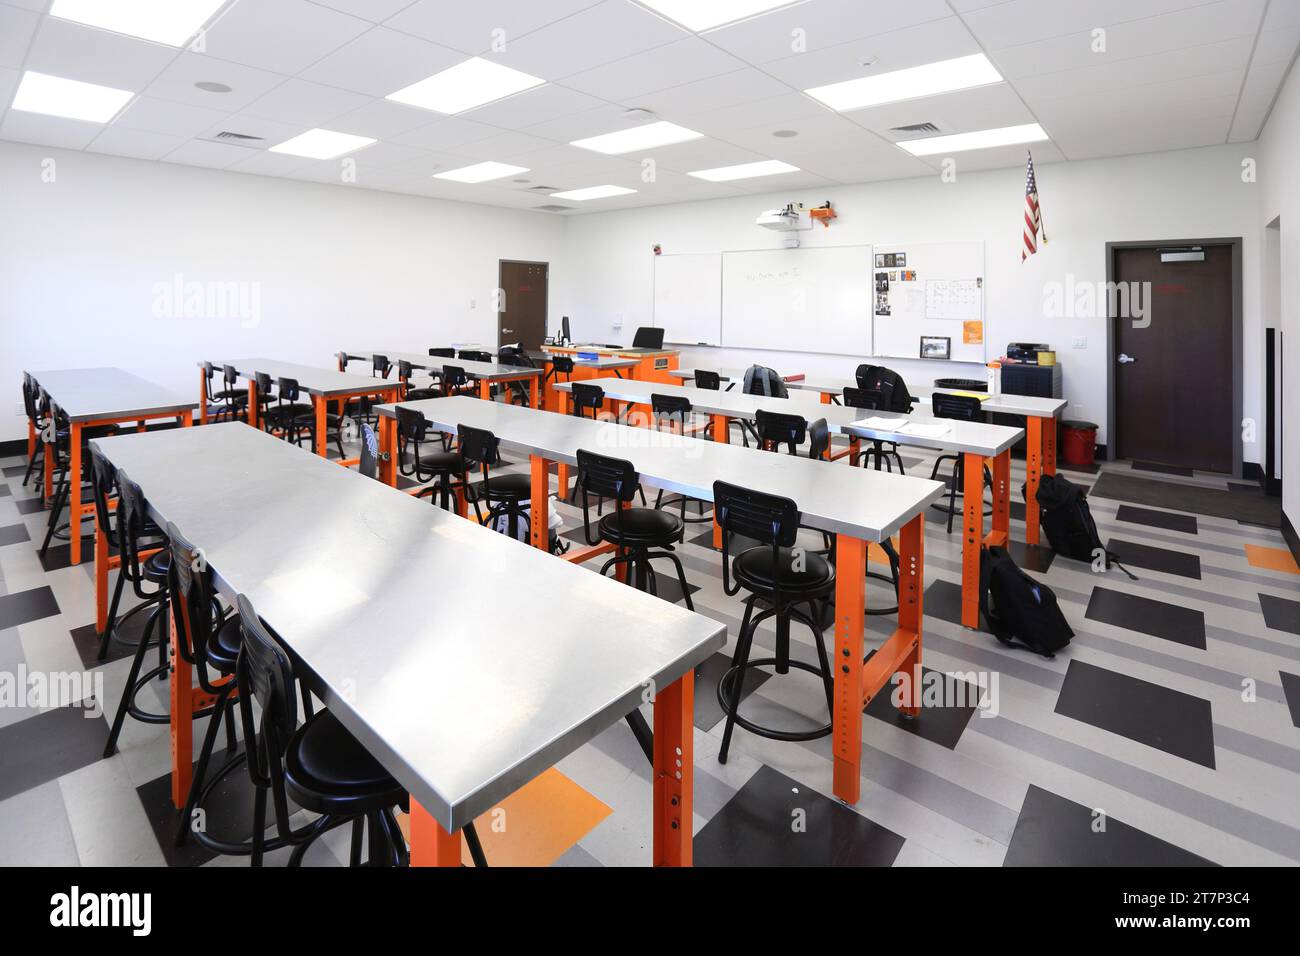 An automotive repair classroom with desks, tables, lab area, and smart projector, in a new modern high school. Stock Photo